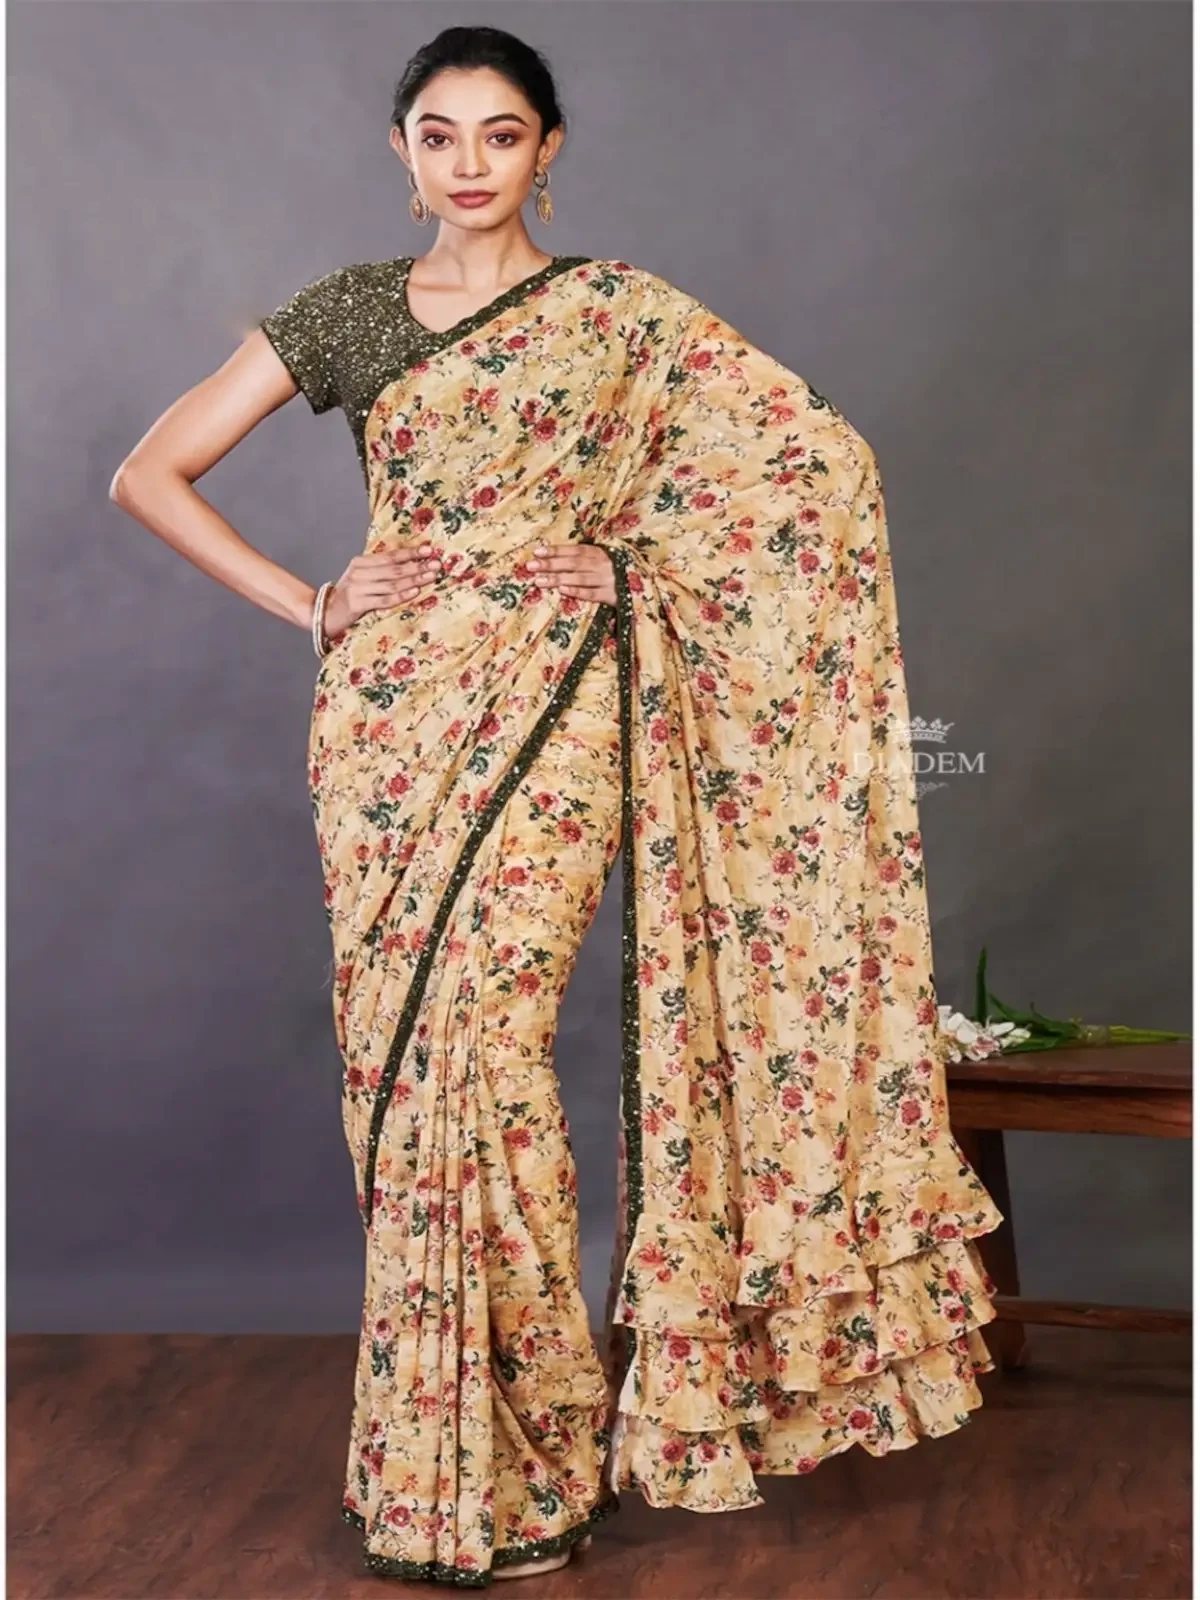 Royal Yellow Georgette Saree With Floral Prints On The Body And Sequins Design Border